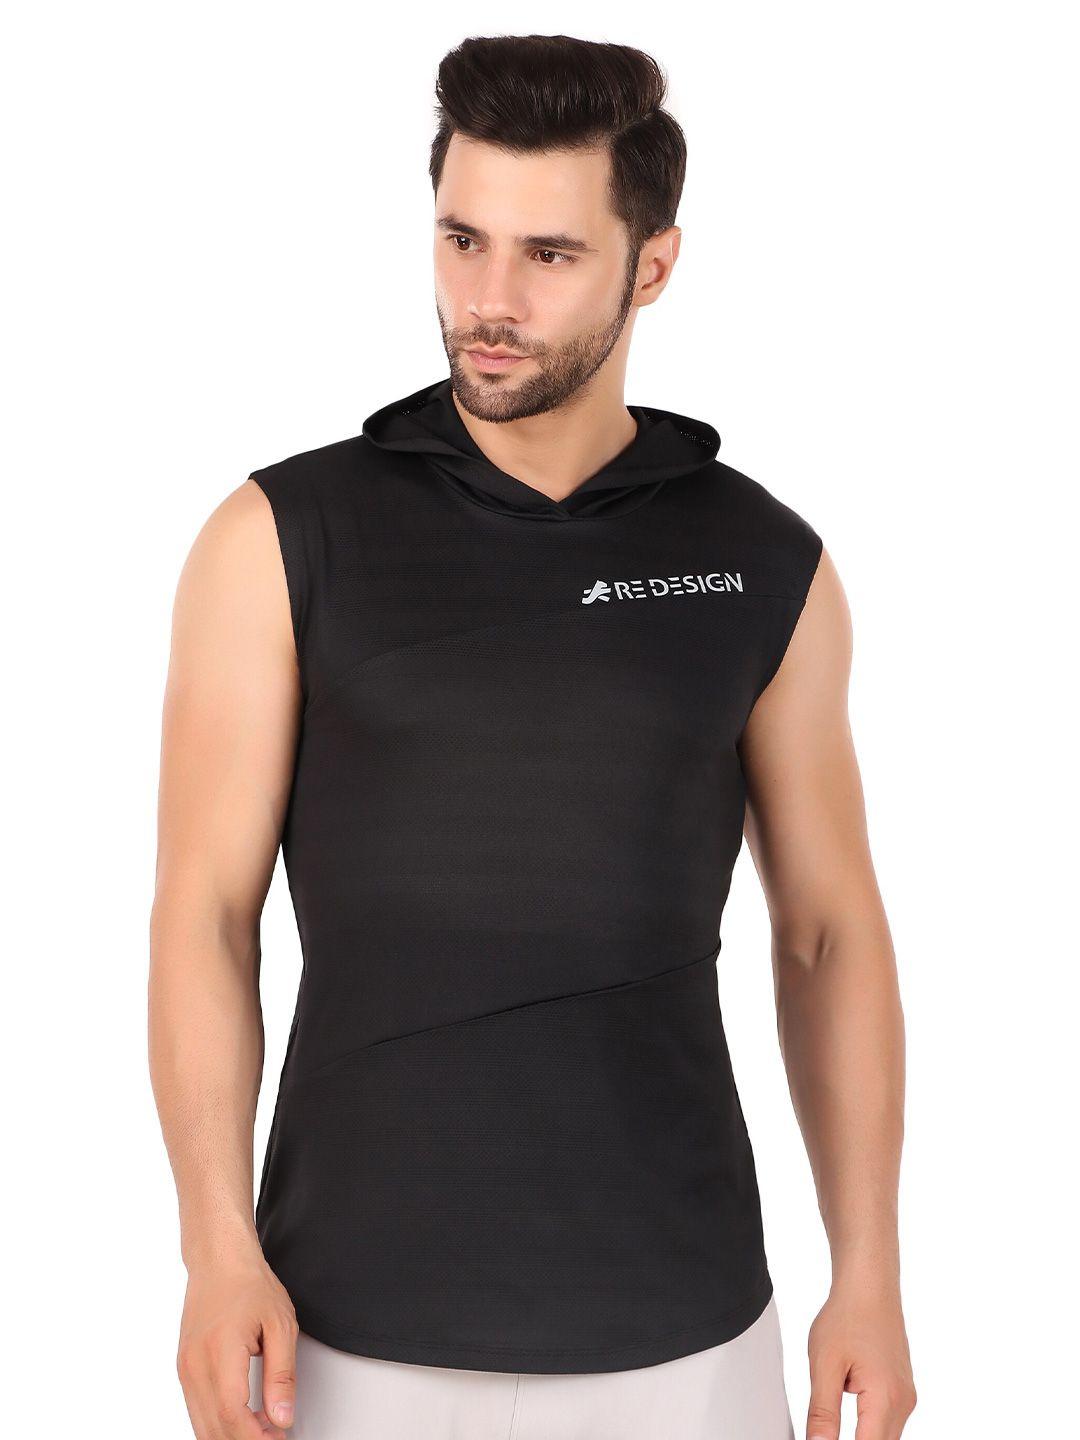 redesign hooded sleeveless dry fit t-shirt